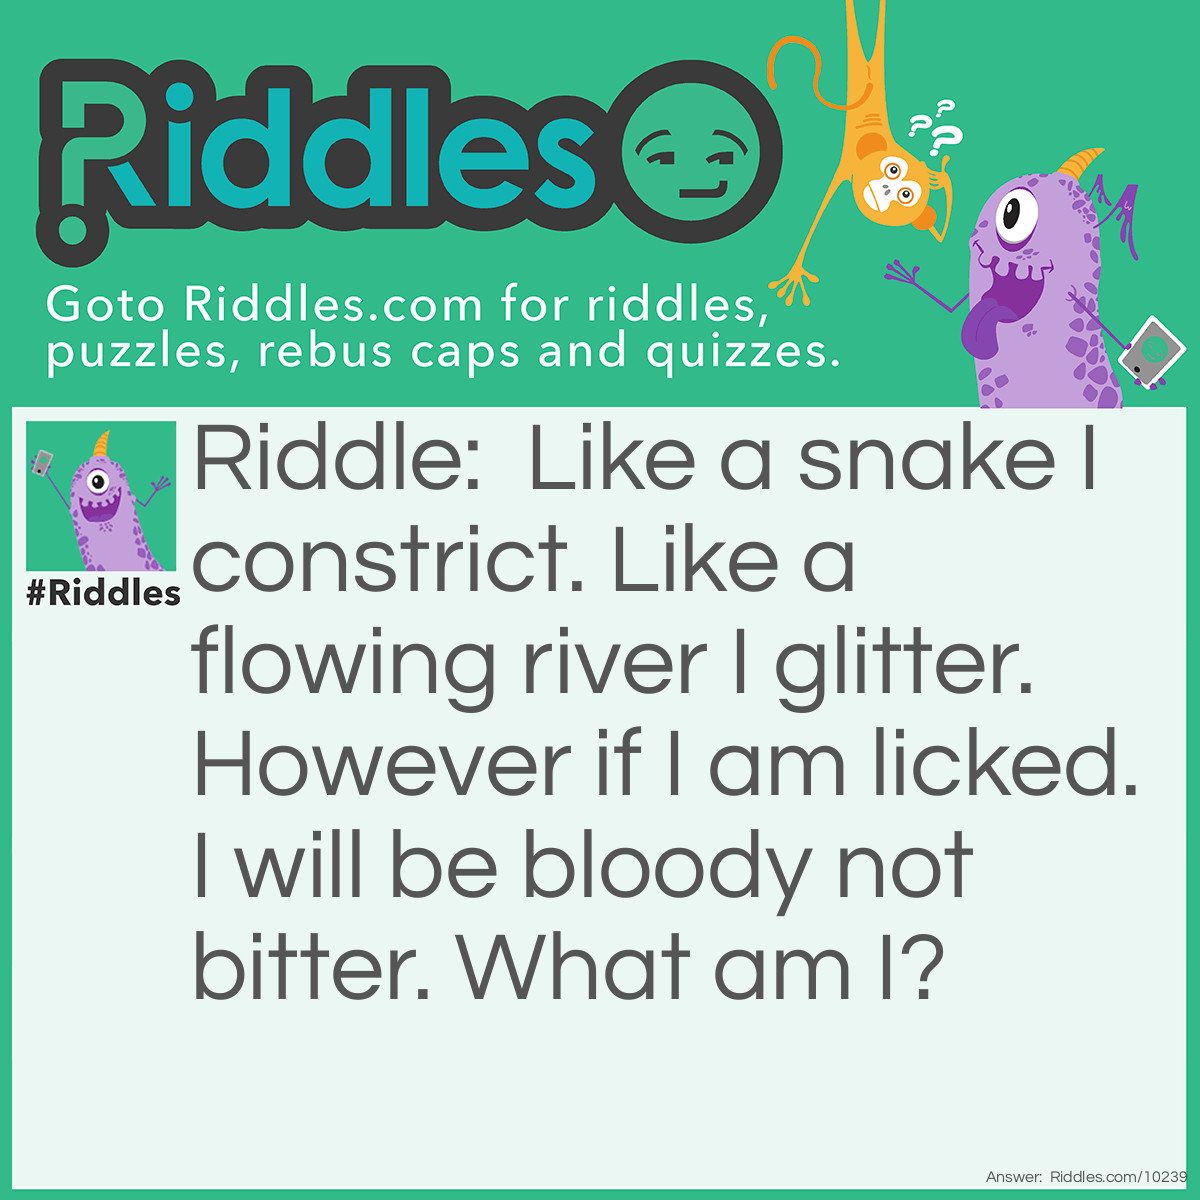 Riddle: Like a snake I constrict. Like a flowing river I glitter. However if I am licked. I will be bloody not bitter. What am I? Answer: A necklace. They constrict your throat, they glitter and if you lick them, they will taste of metal (the same taste as your blood.)